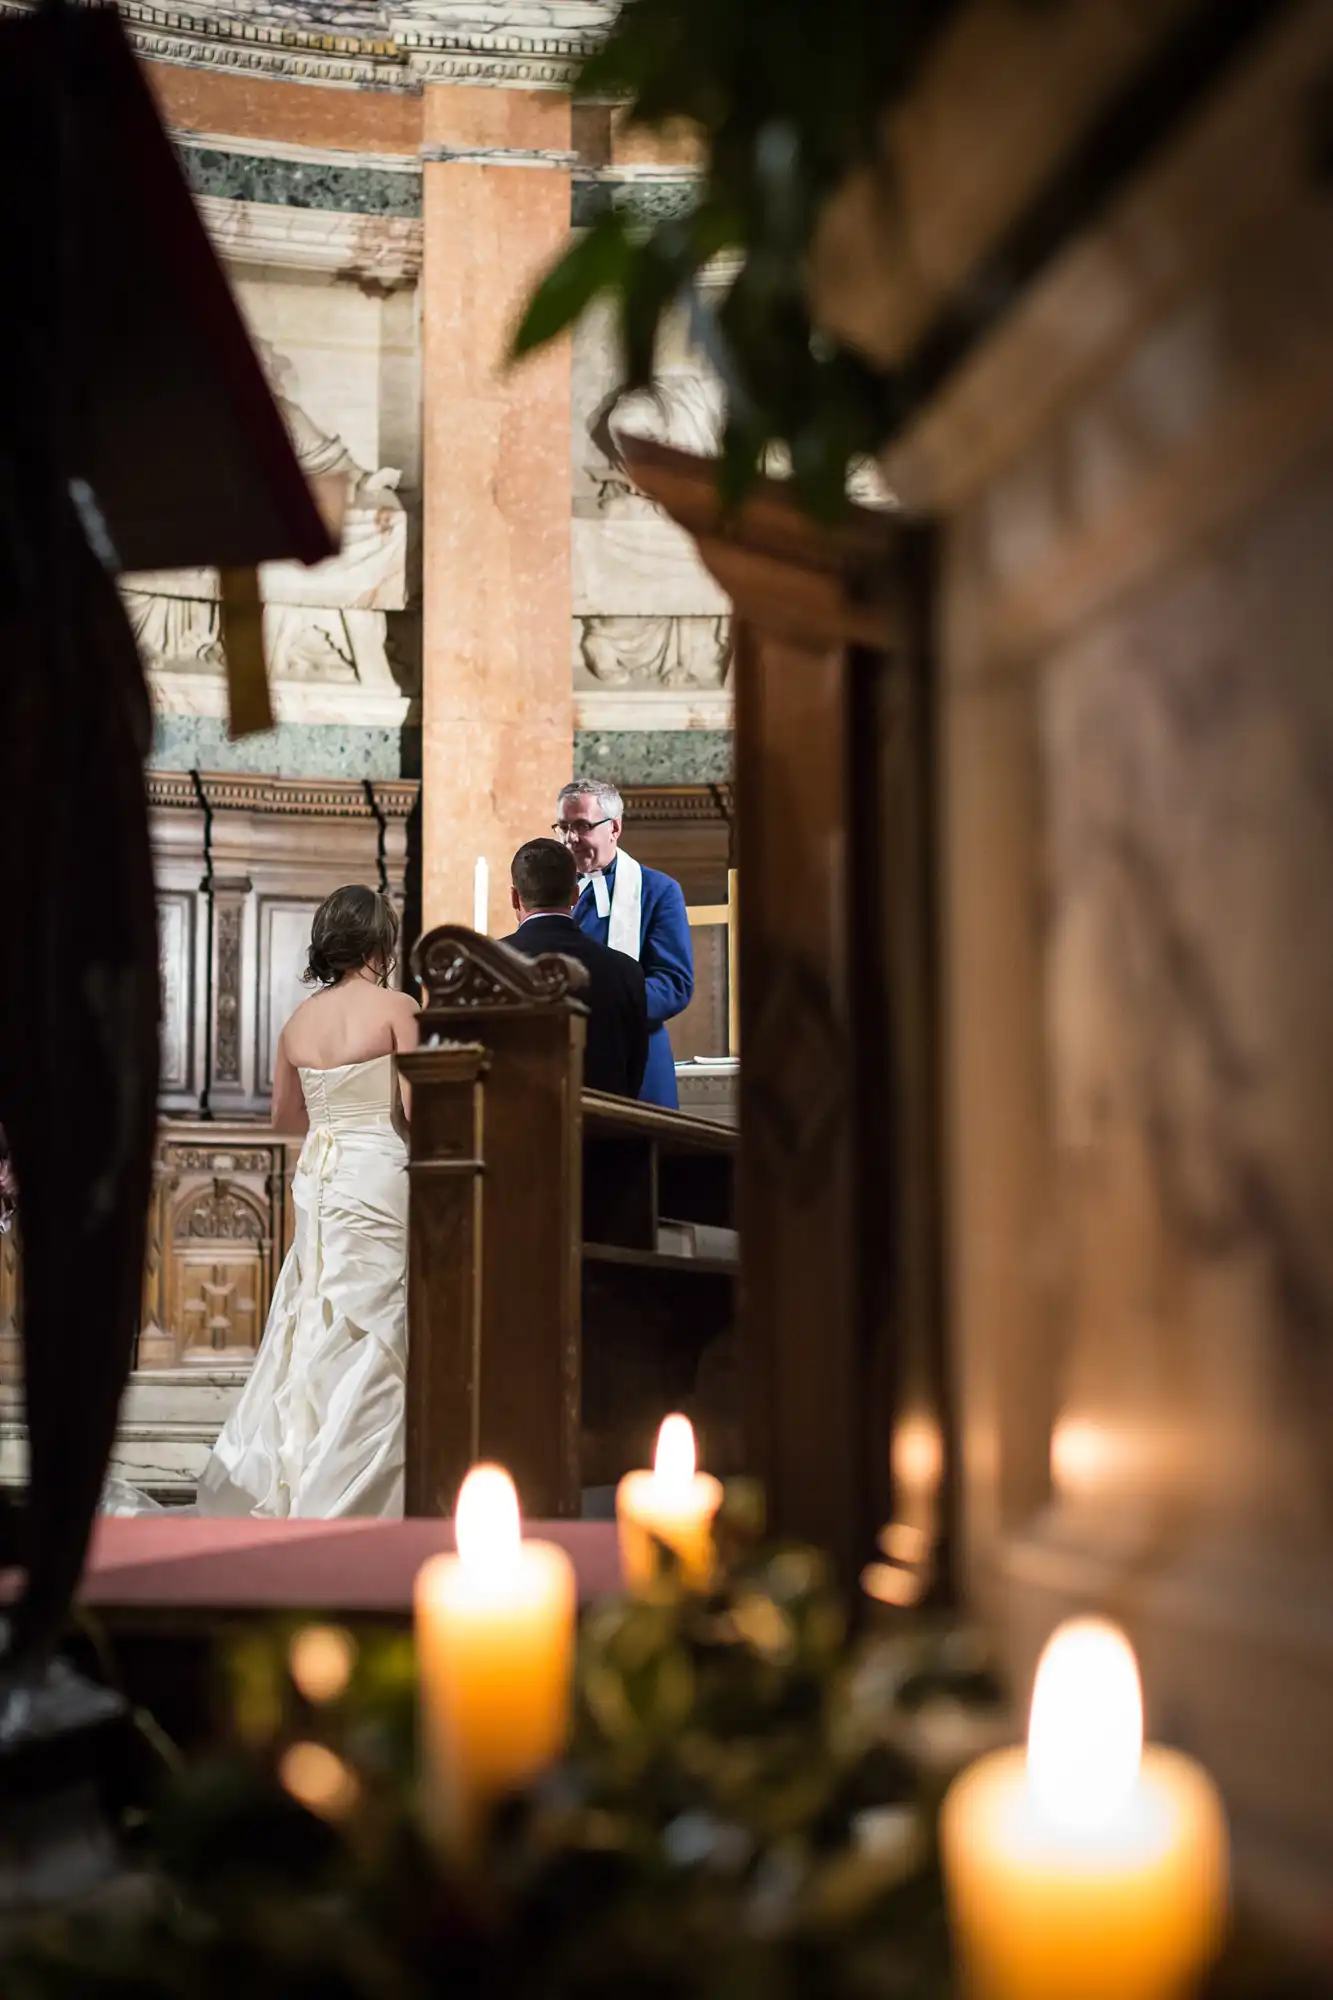 A bride and groom exchange vows at an altar, viewed through a gap between candles, in an ornate church setting.